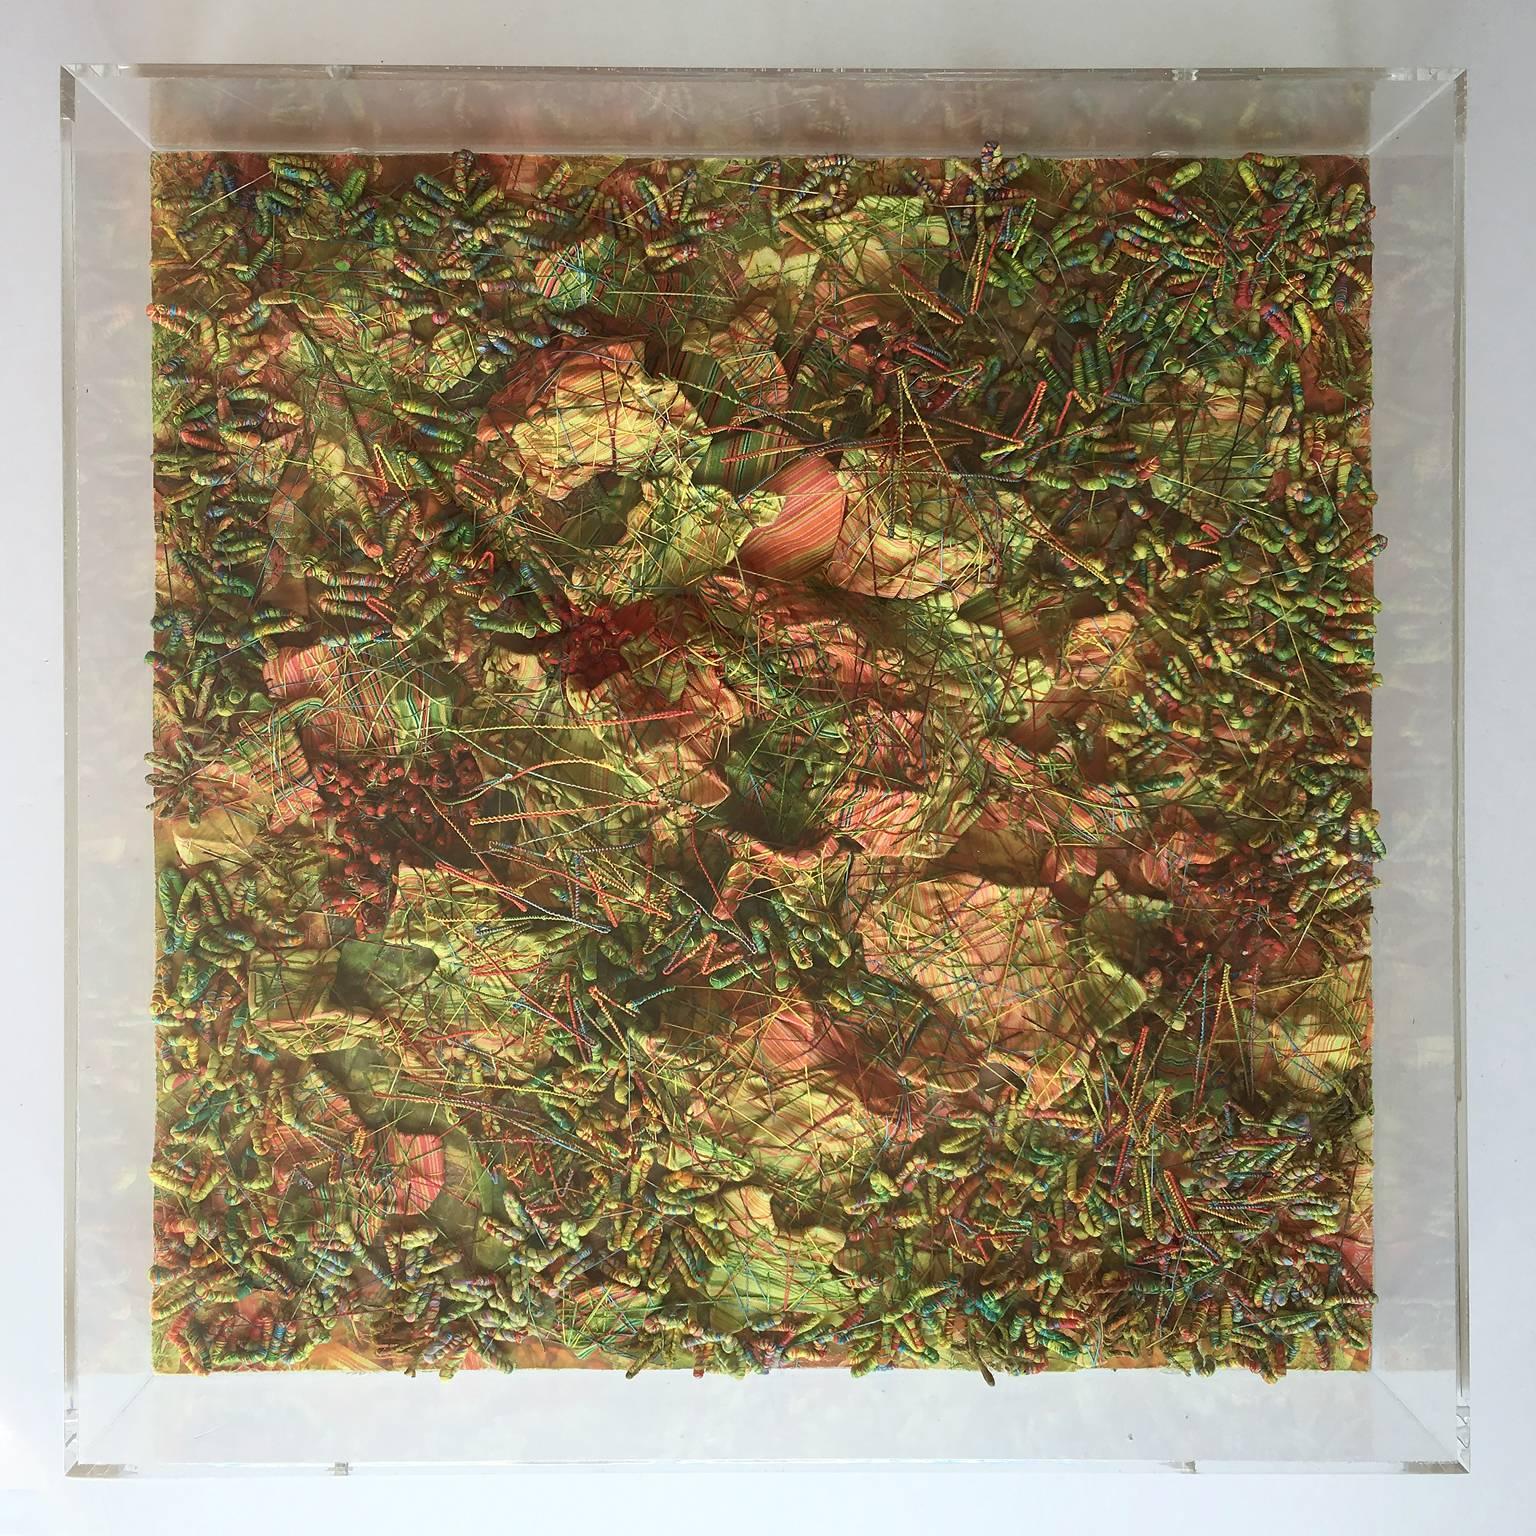 Herbage - Contemporary Mixed Media Art by Françoise Tellier Loumagne